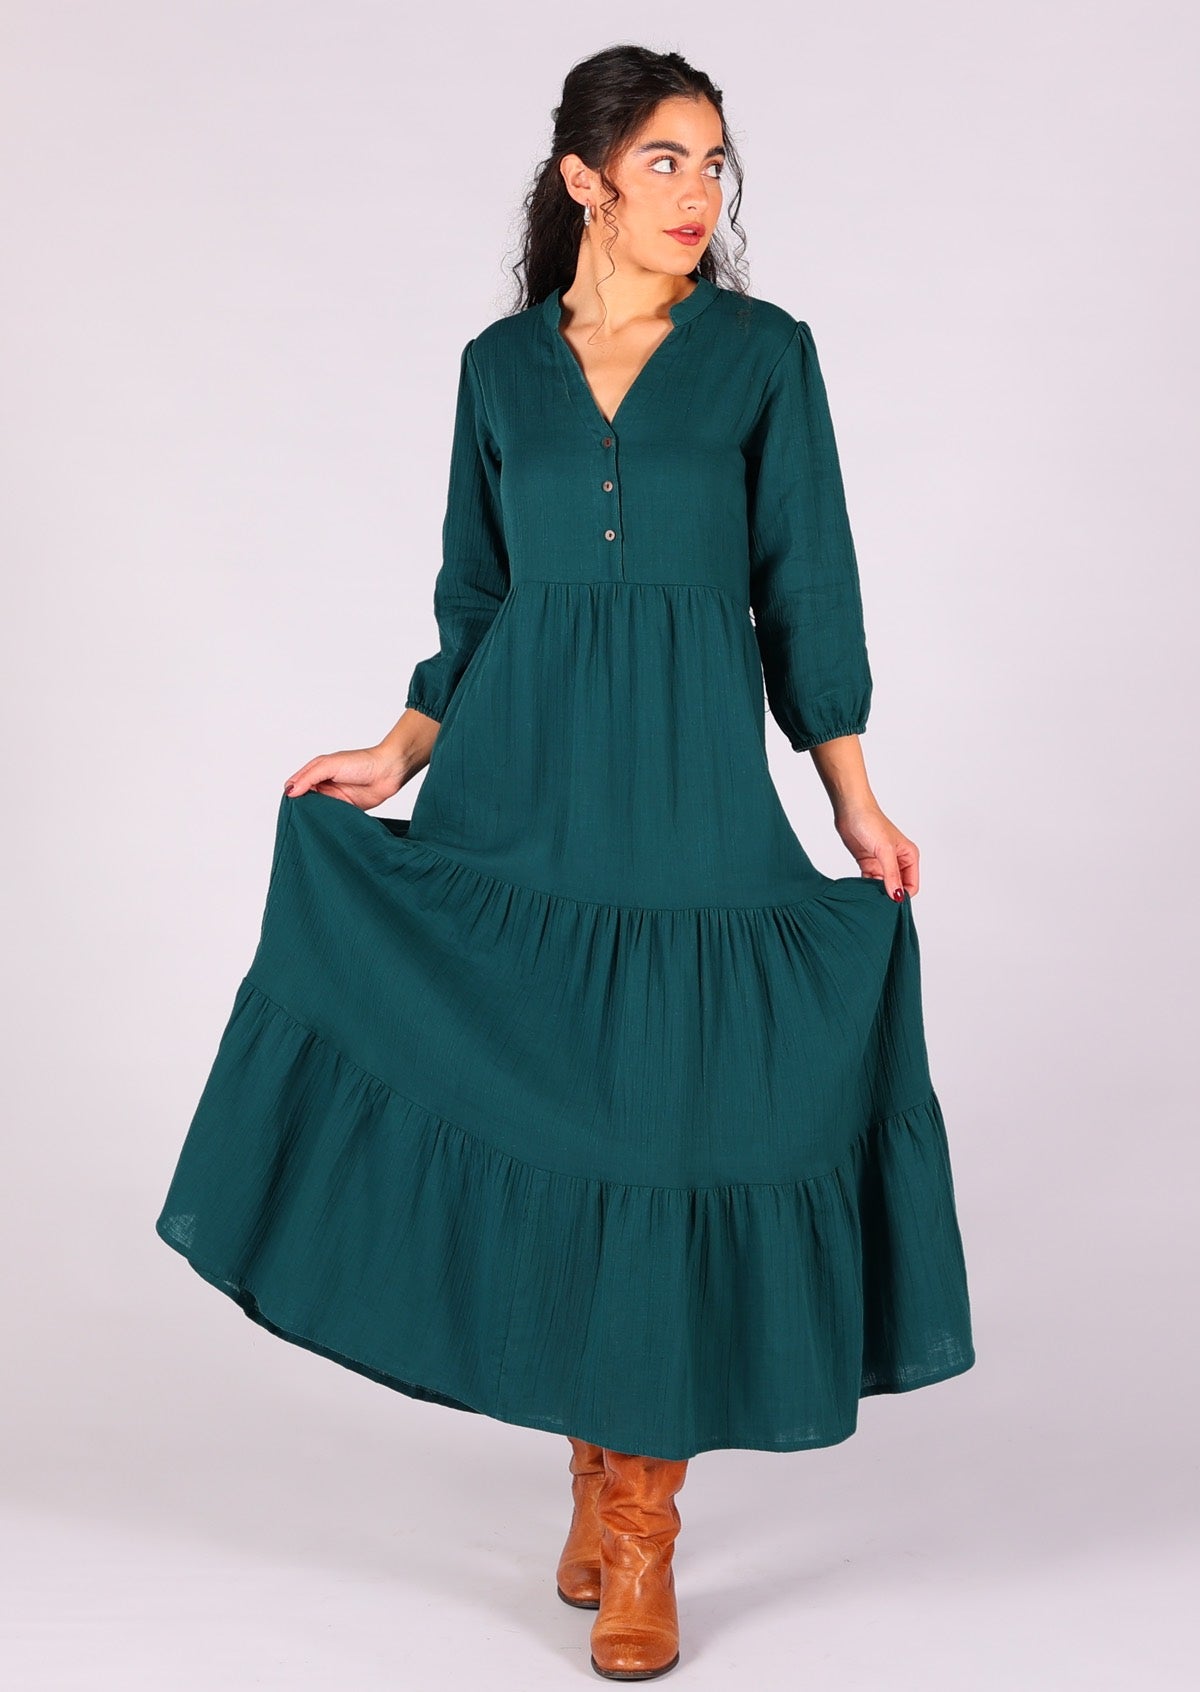 Make a statement in this double cotton tiered maxi dress in gorgeous deep teal